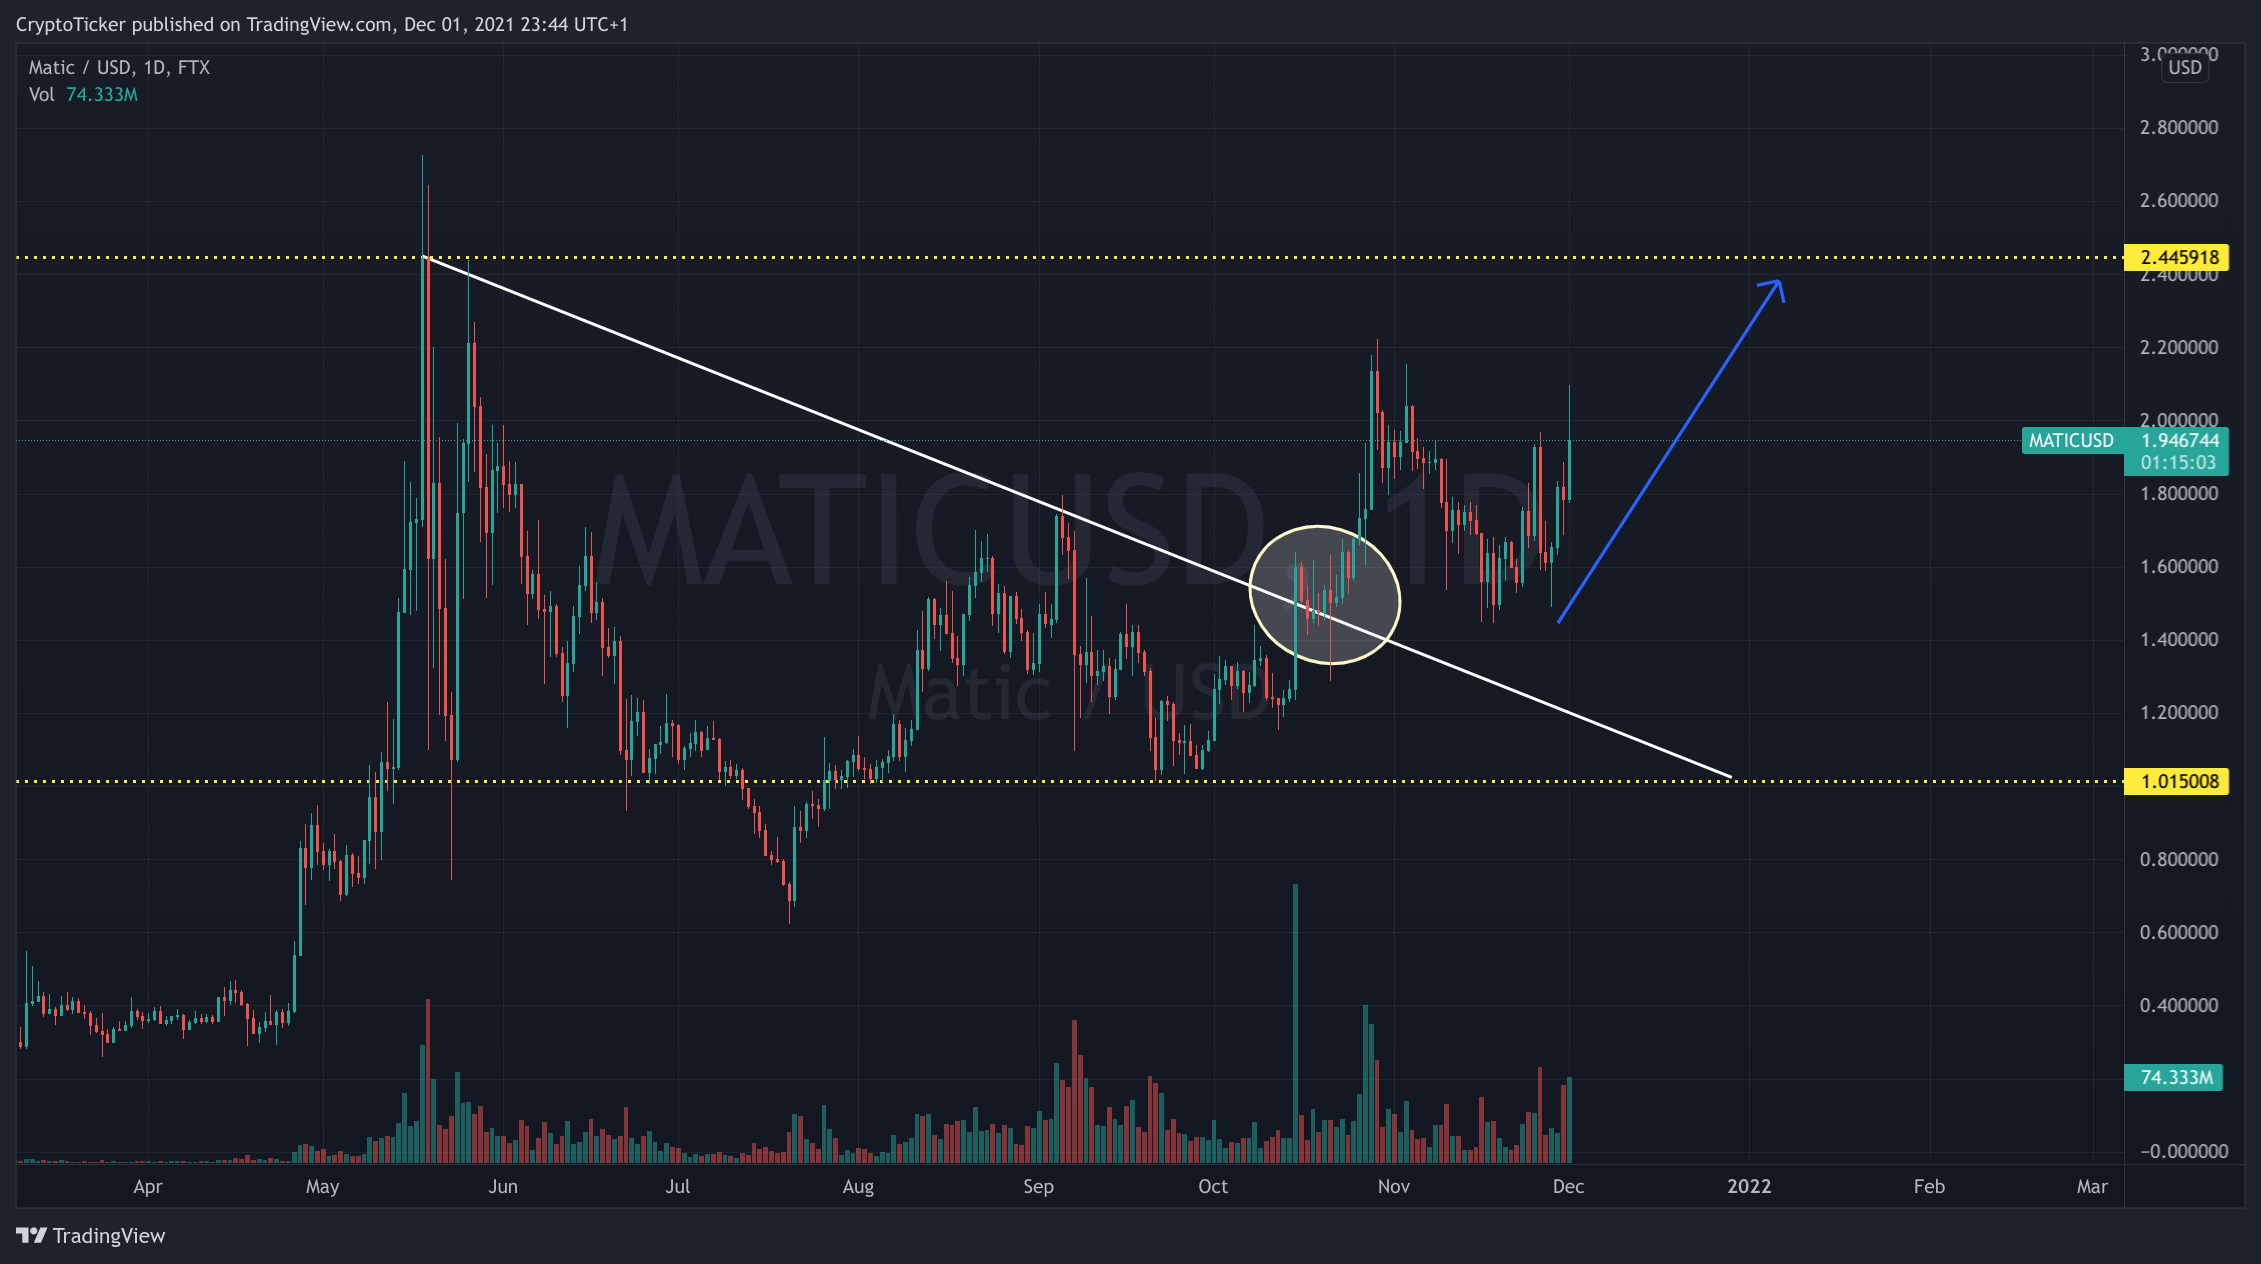 MATIC/USD 1-day chart showing MATIC's target 